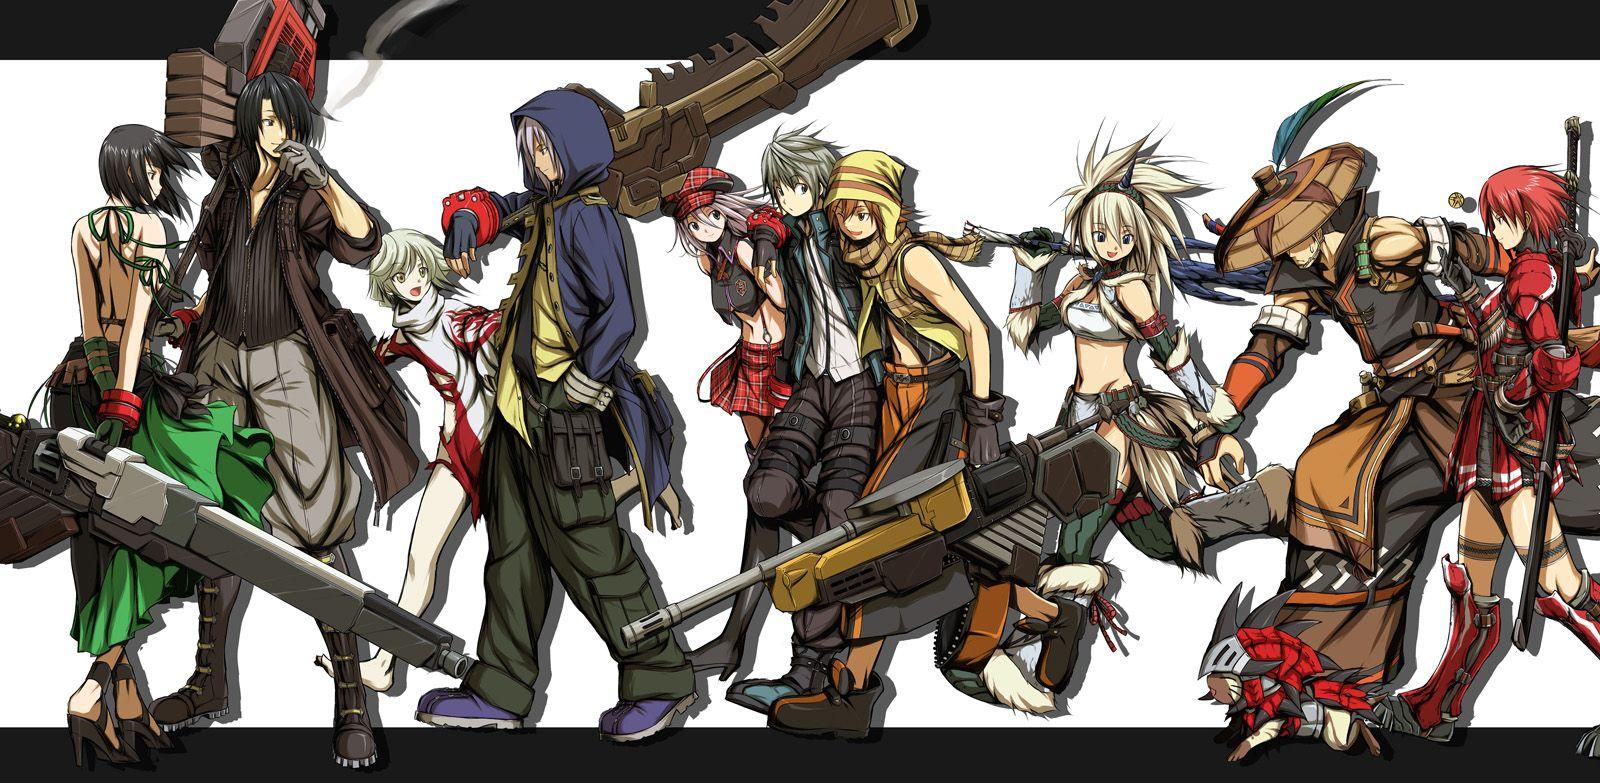 1920x1080 / 1920x1080 god eater wallpaper - Coolwallpapers.me!